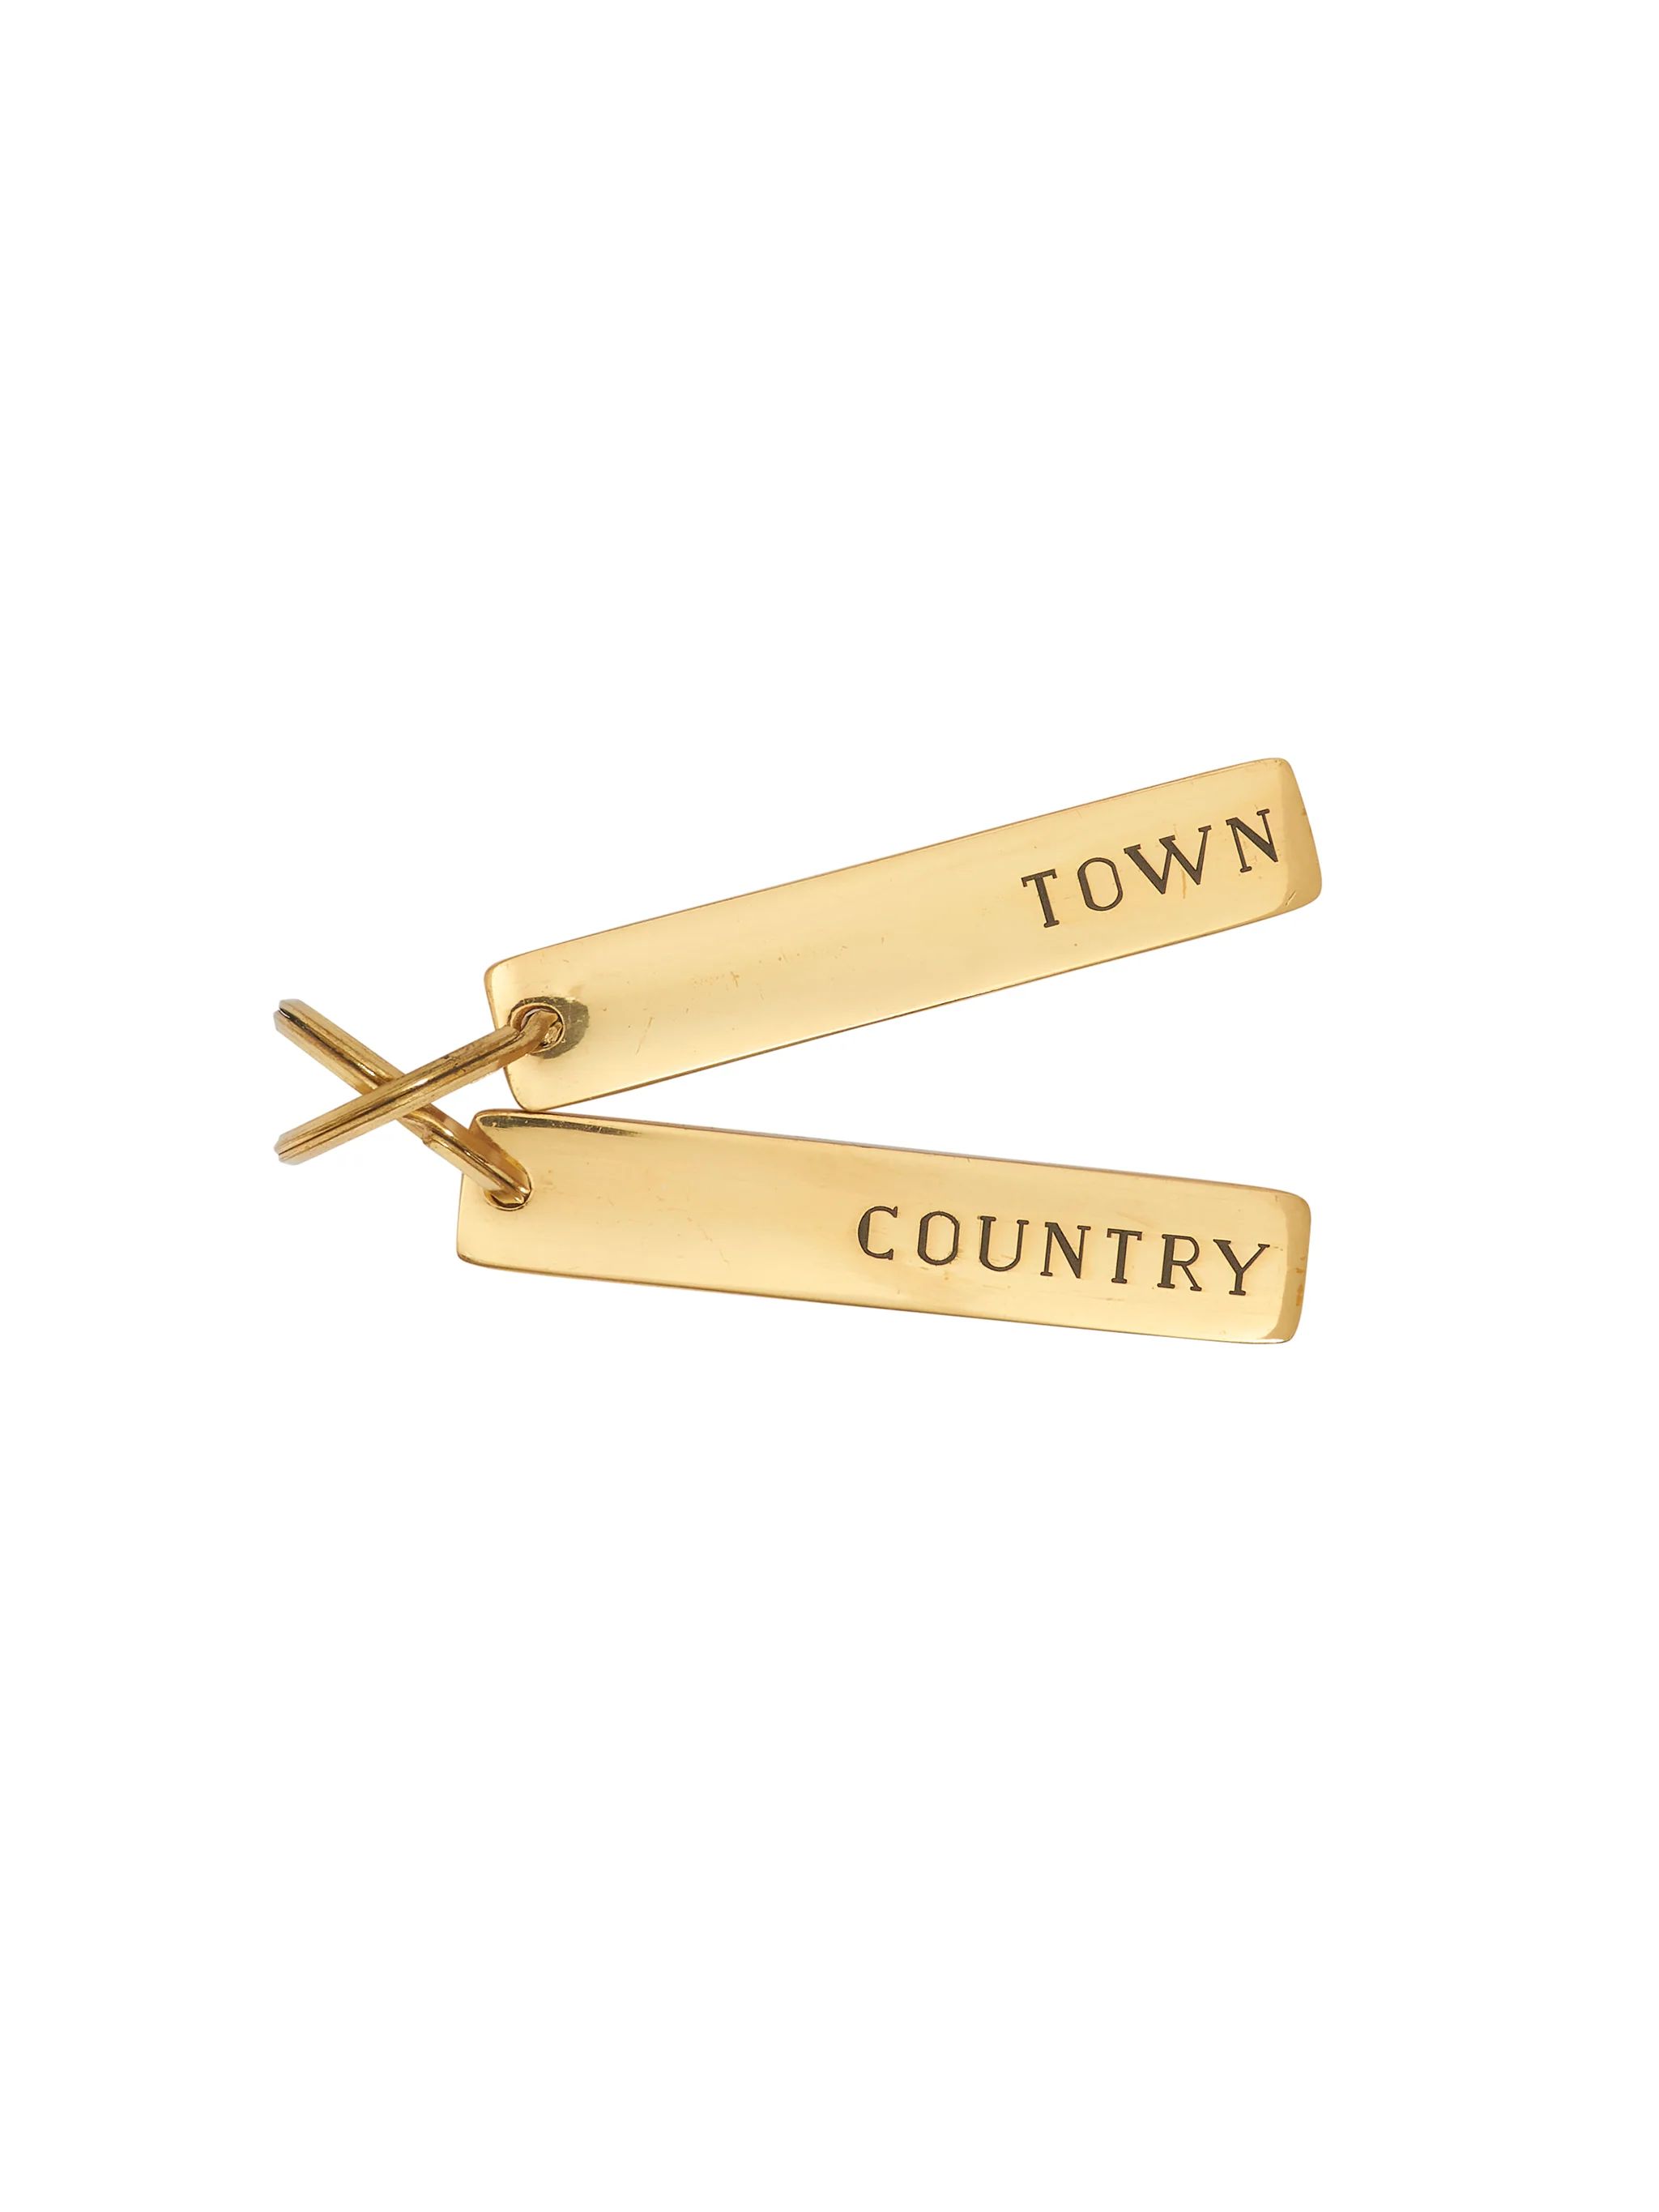 Town & Country Key Chain Pair | Weston Table